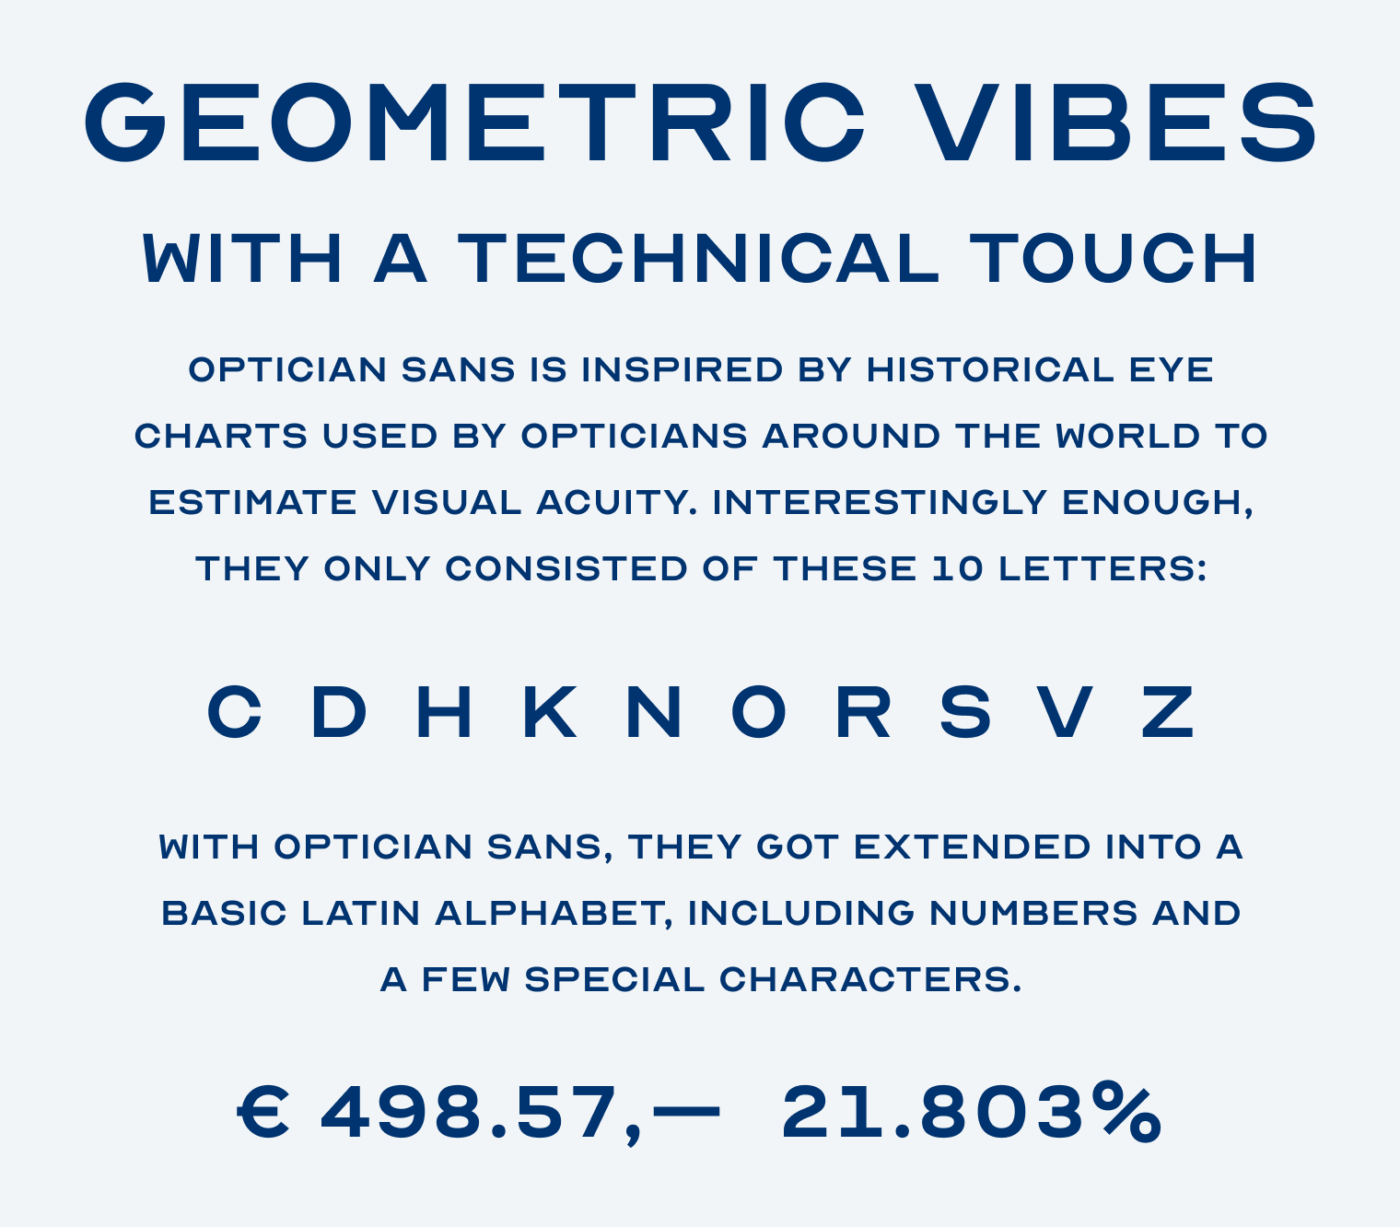 Geometric vibes with a technical touch. Optician Sans is inspired by historical eye charts used by opticians around the World to estimate visual acuity. Interestingly enough, they only consisted of these 10 letters: C, D, H, K, N, O, R, S, V, Z. With Optician Sans, they got extended into a basic Latin alphabet, including numbers and a few special characters.